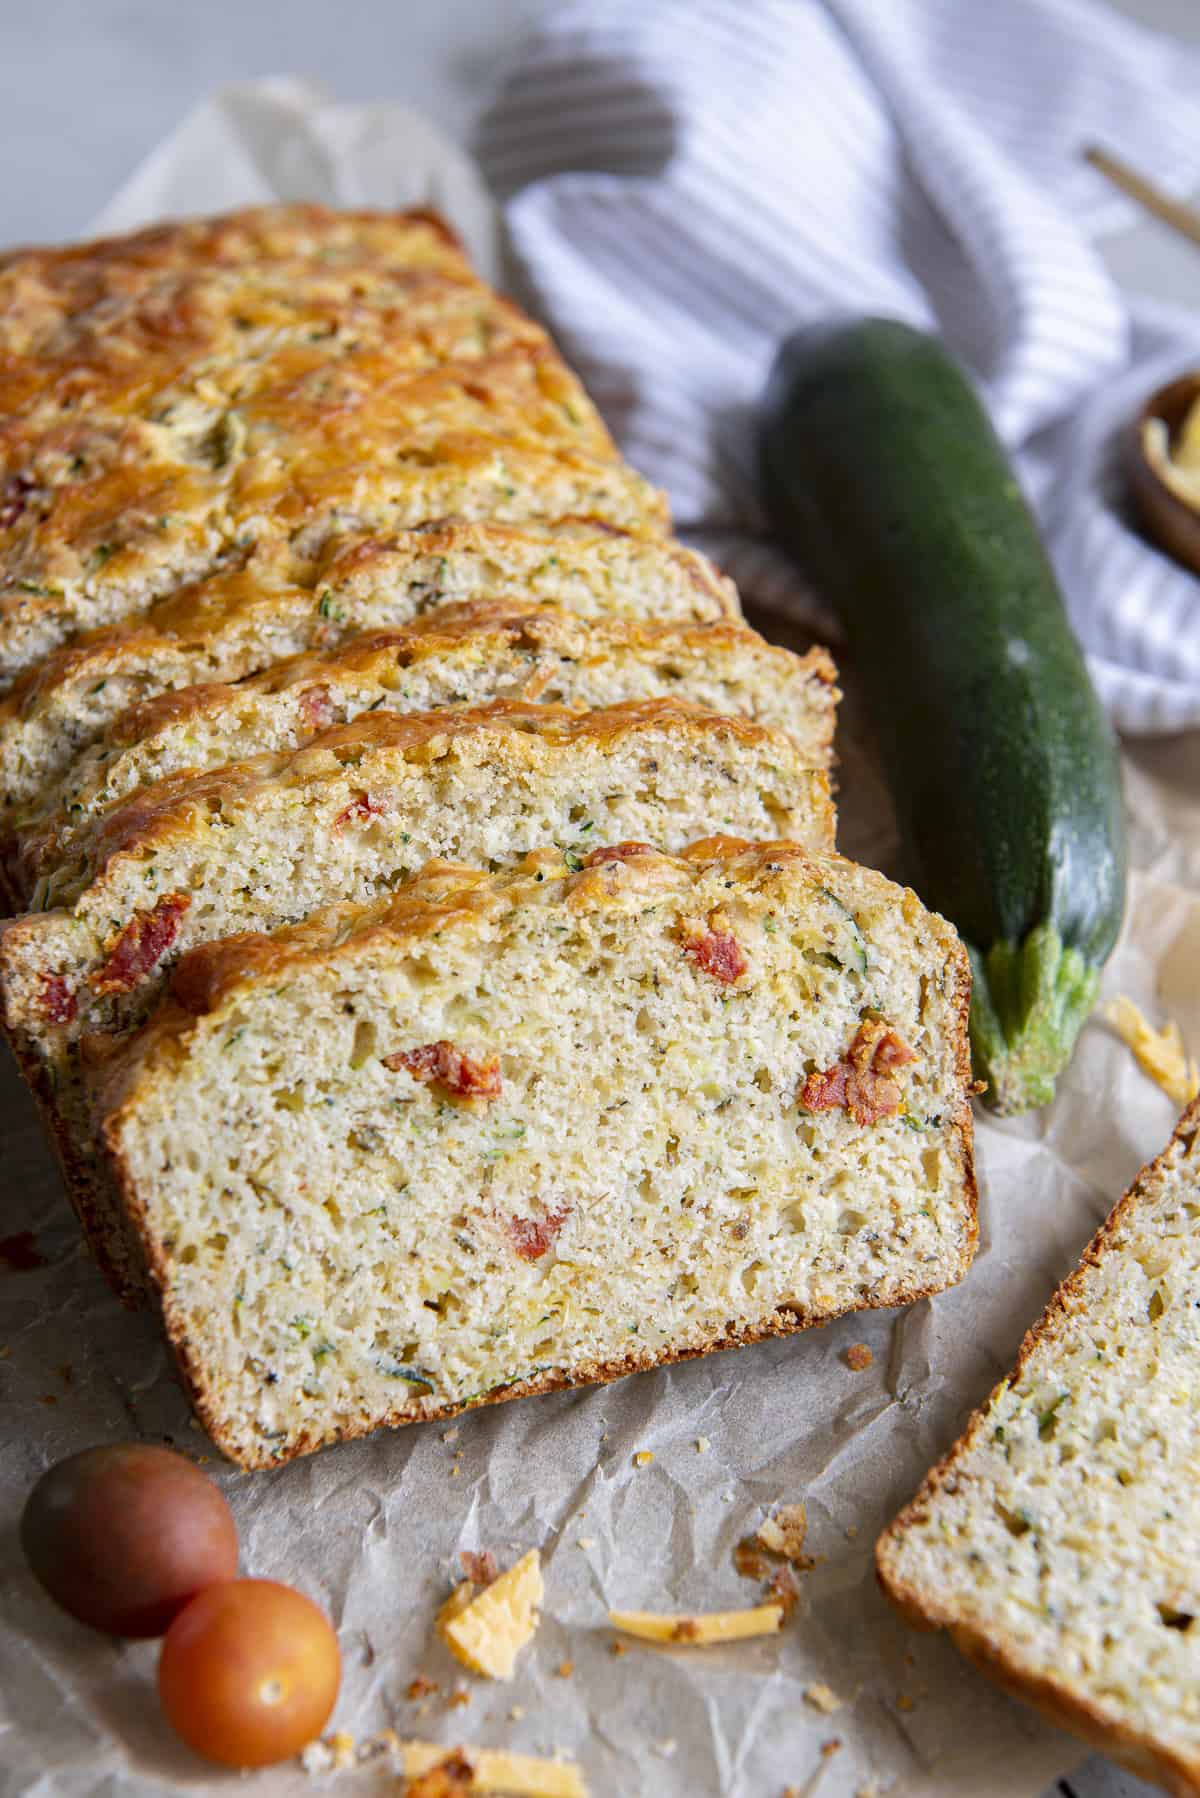 several slices of savory zucchini bread shingled together with veggies surrounding them